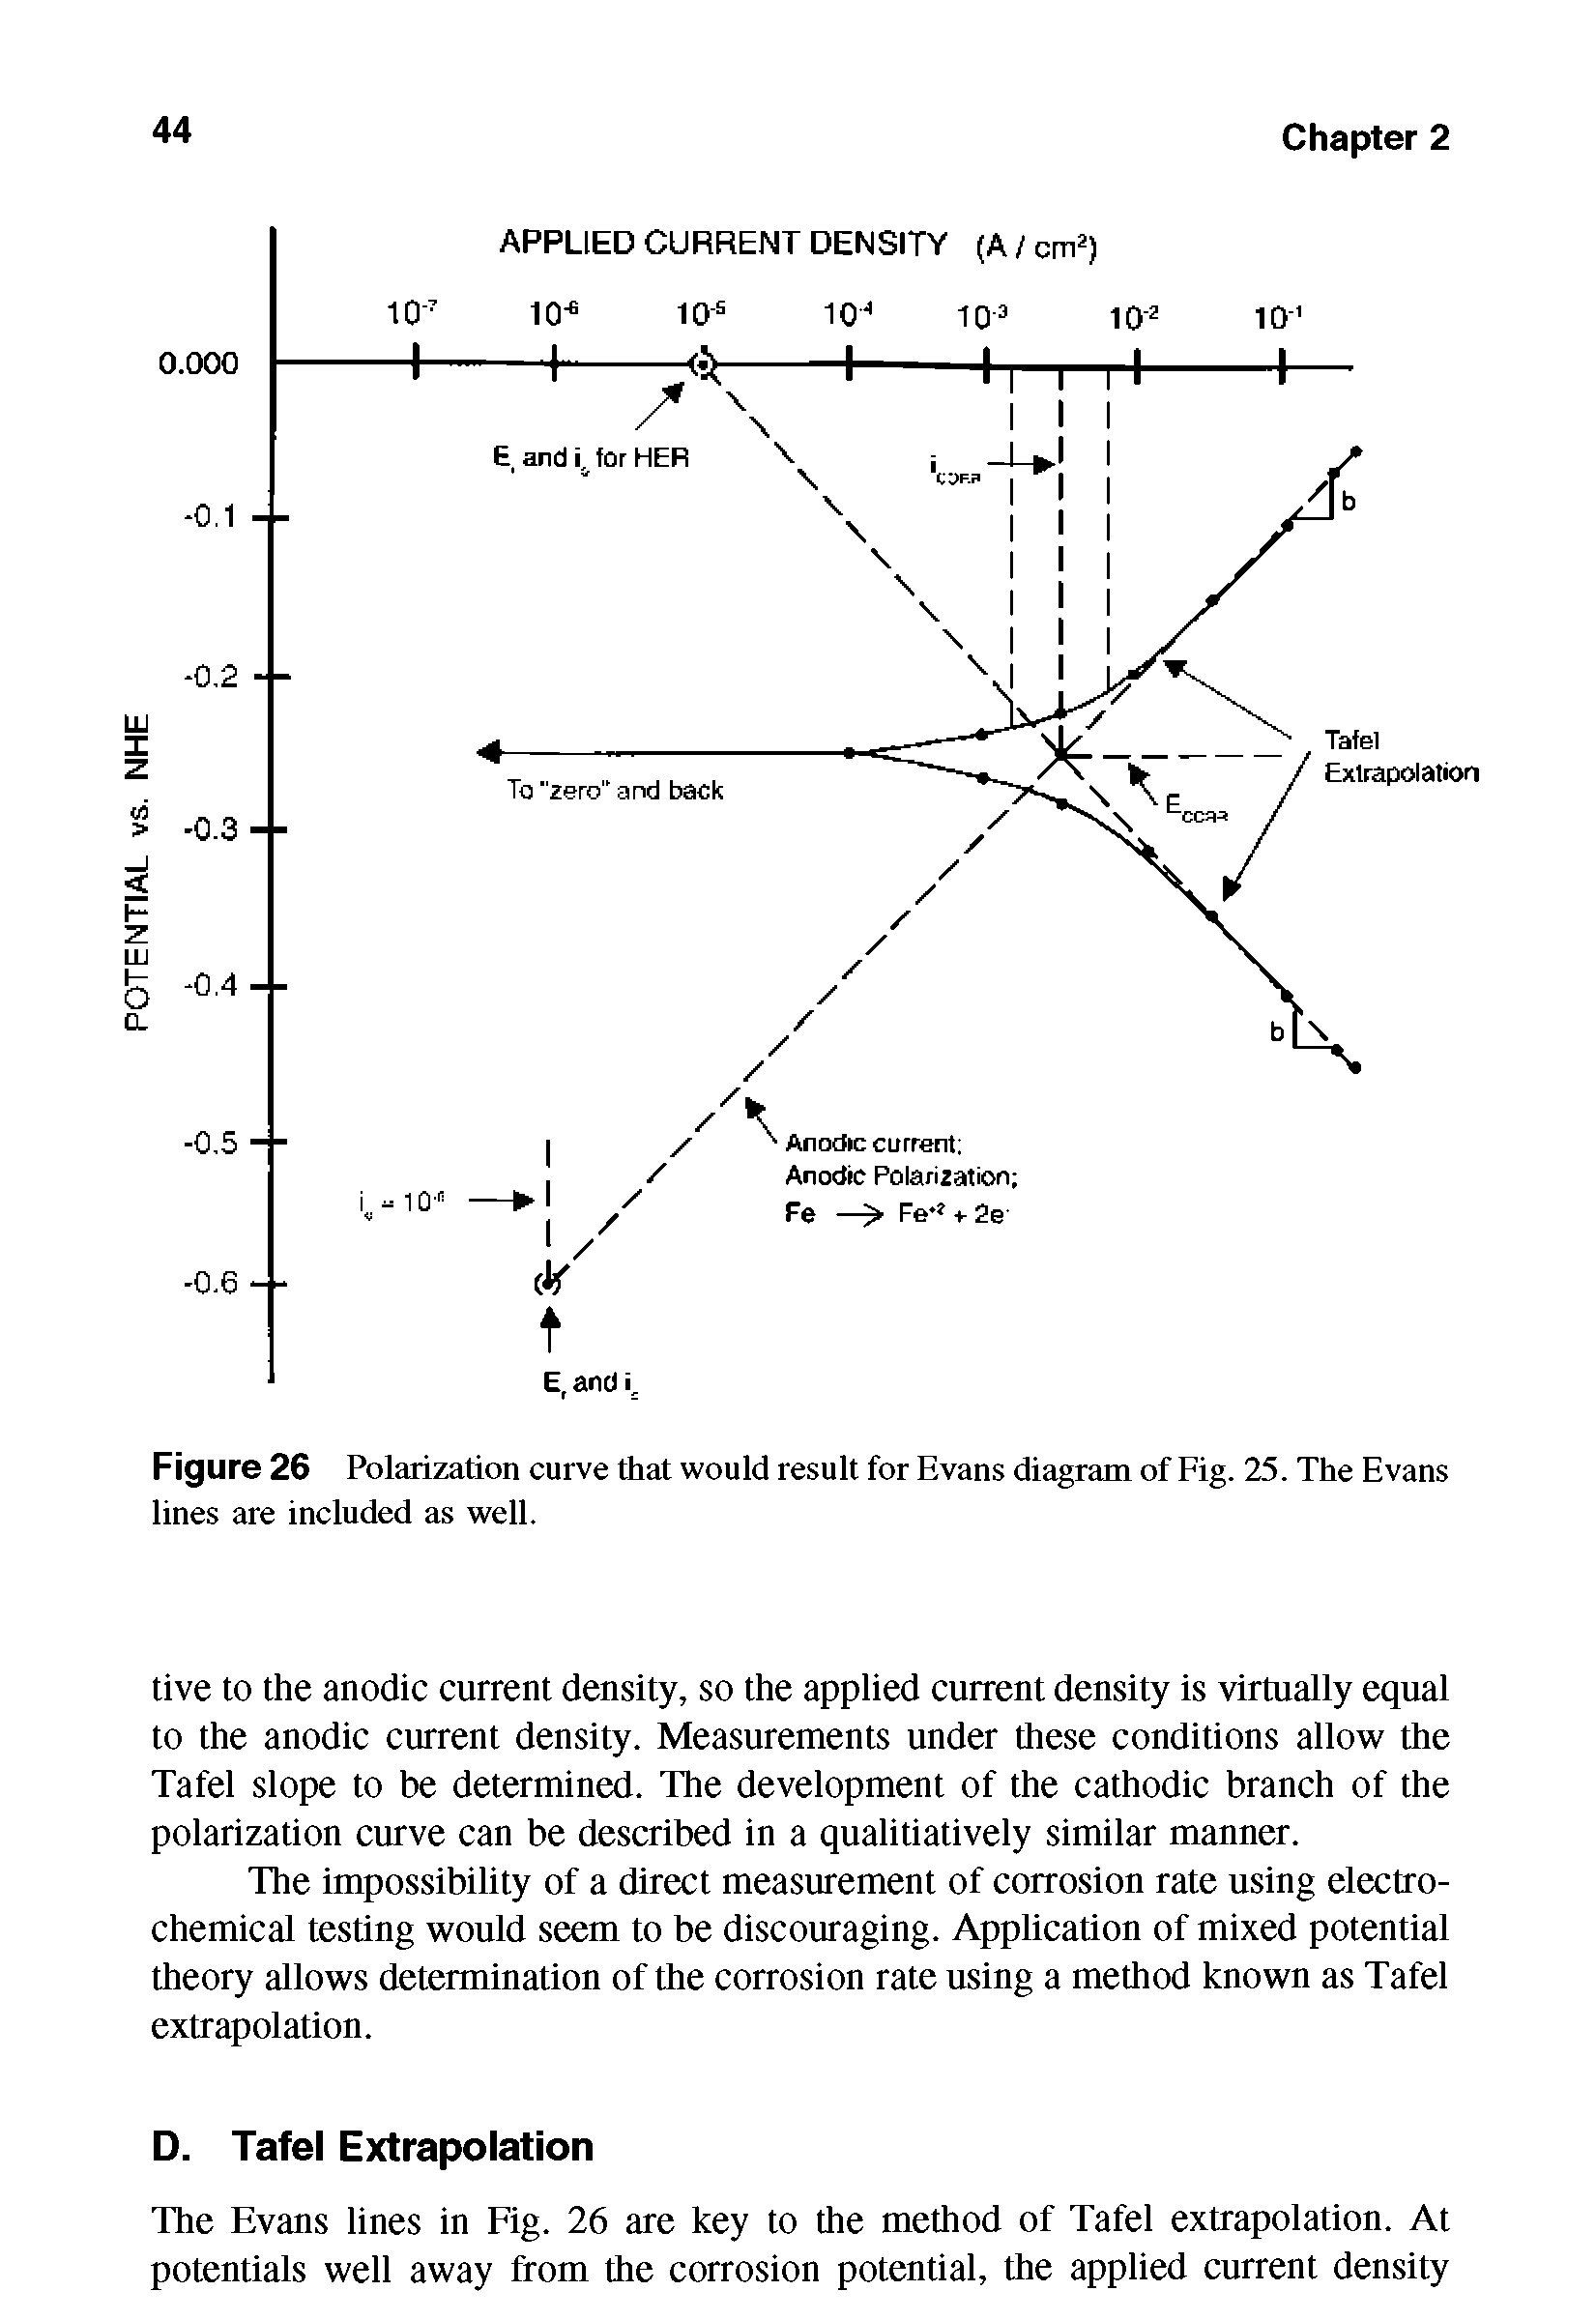 Figure 26 Polarization curve that would result for Evans diagram of Fig. 25. The Evans lines are included as well.